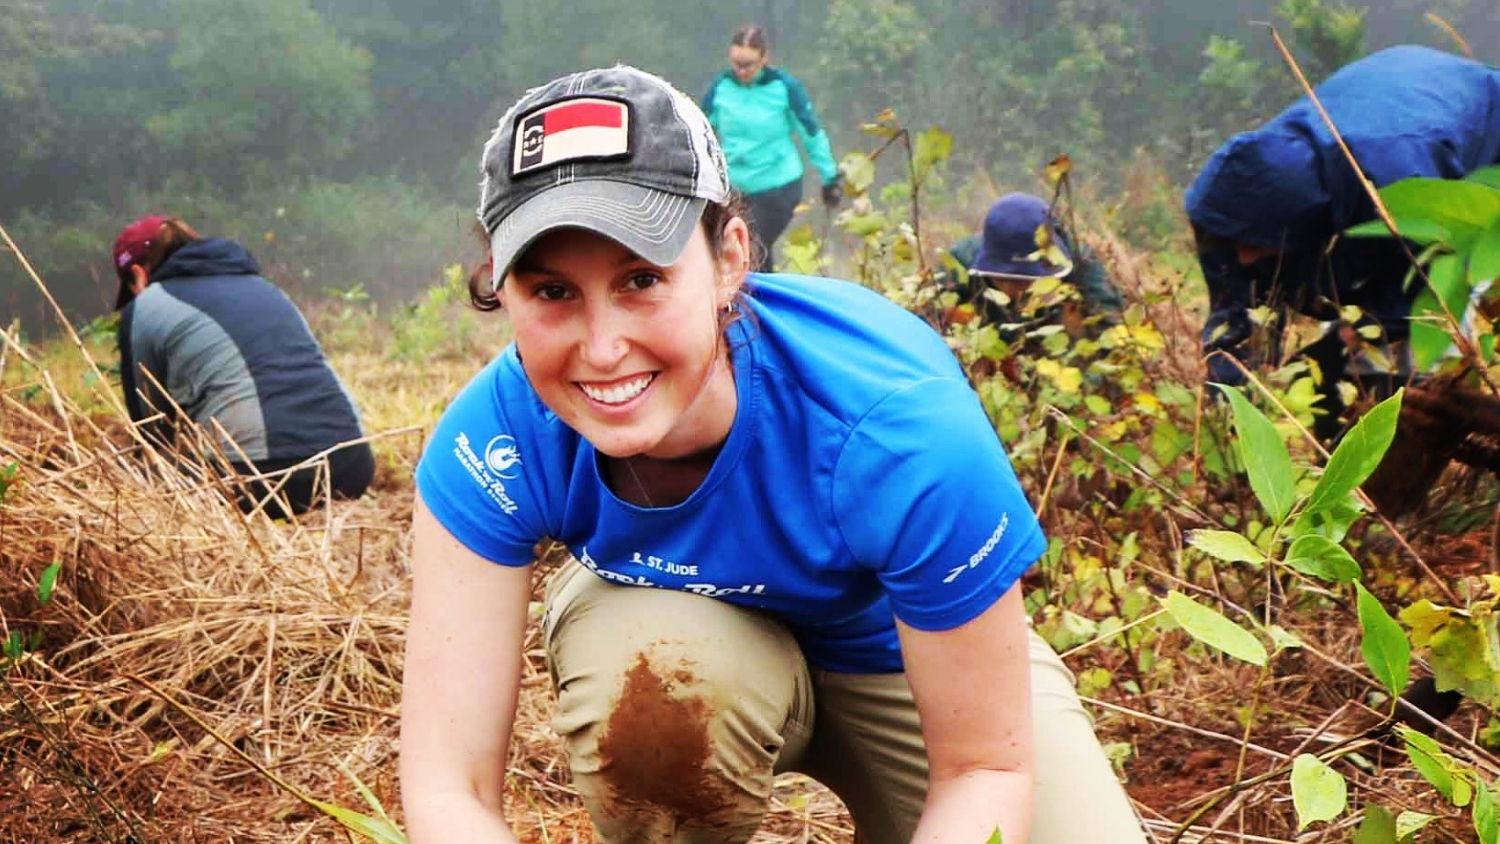 Caitlin Reilly - Graduation to Vocation: Connecting Youth to Agriculture - College of Natural Resources News NC State University